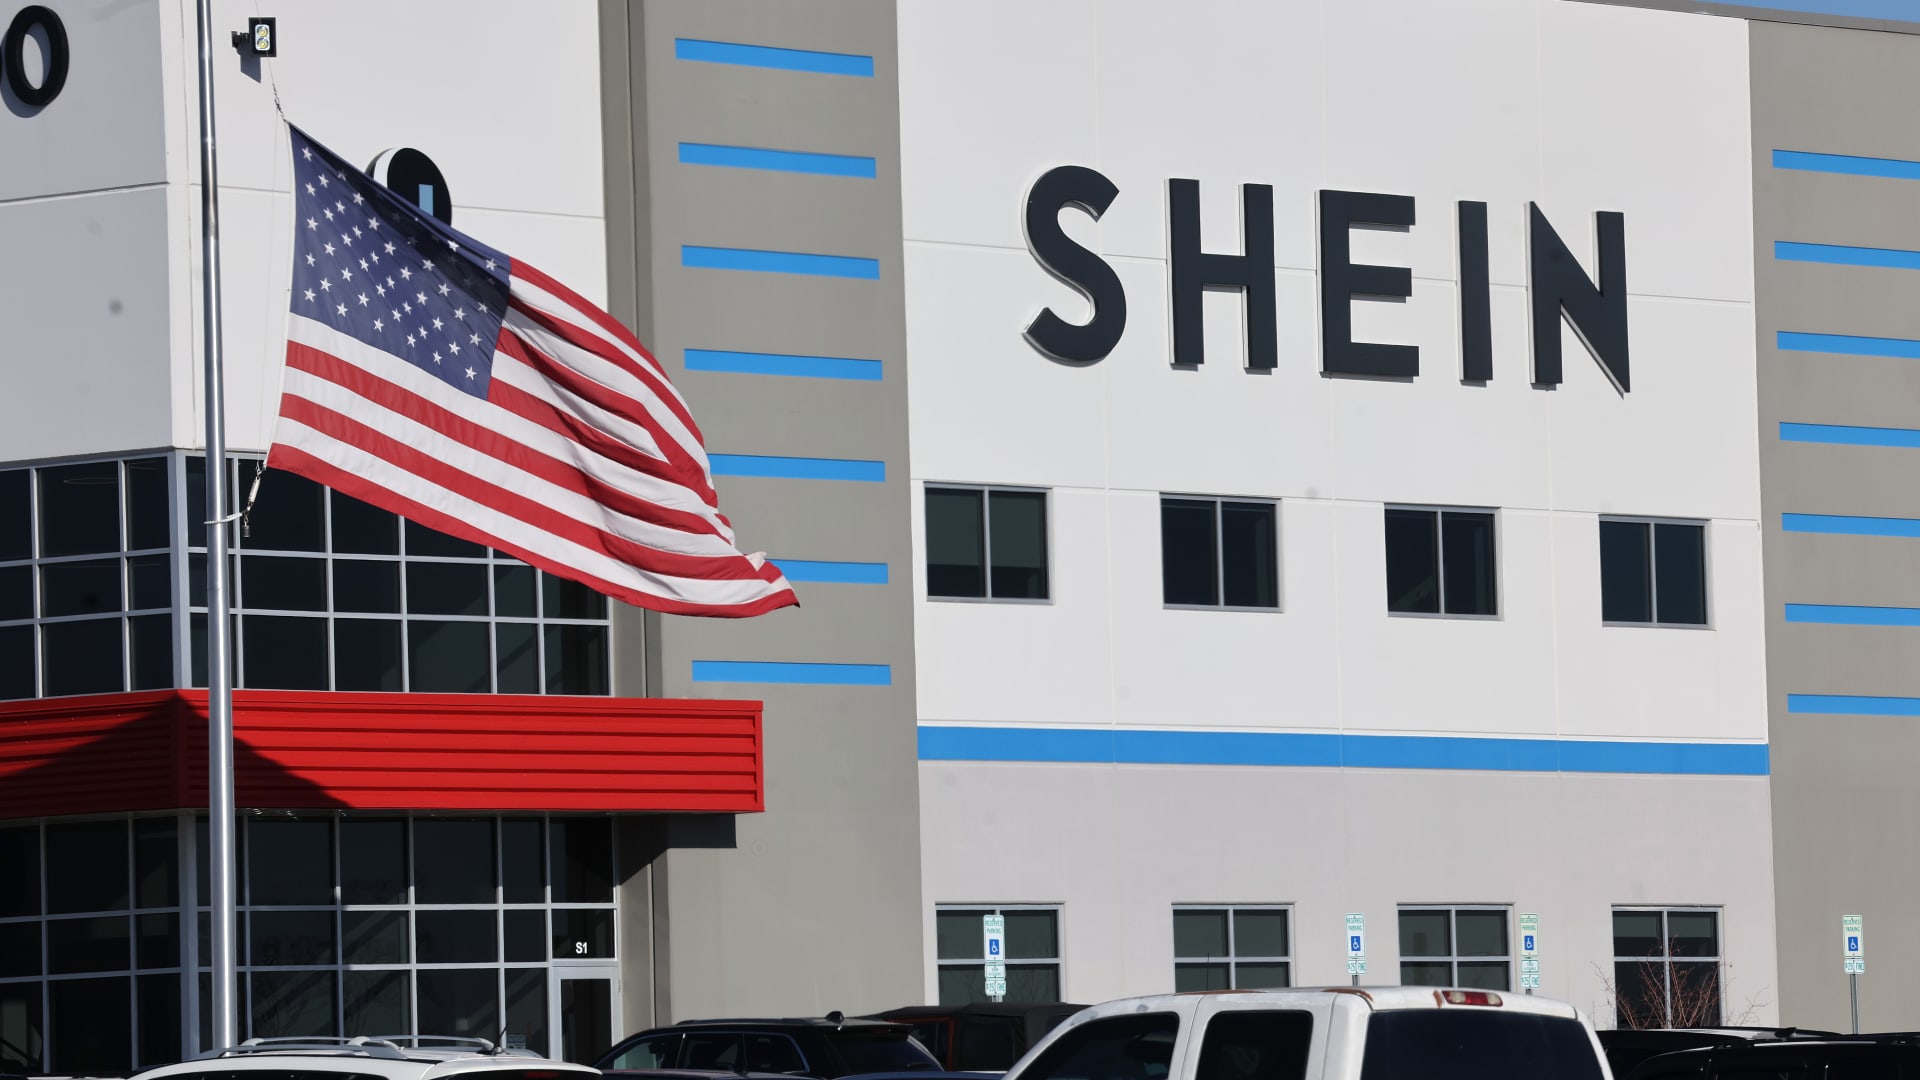 Shein grilled on China relationship, data privacy ahead of IPO